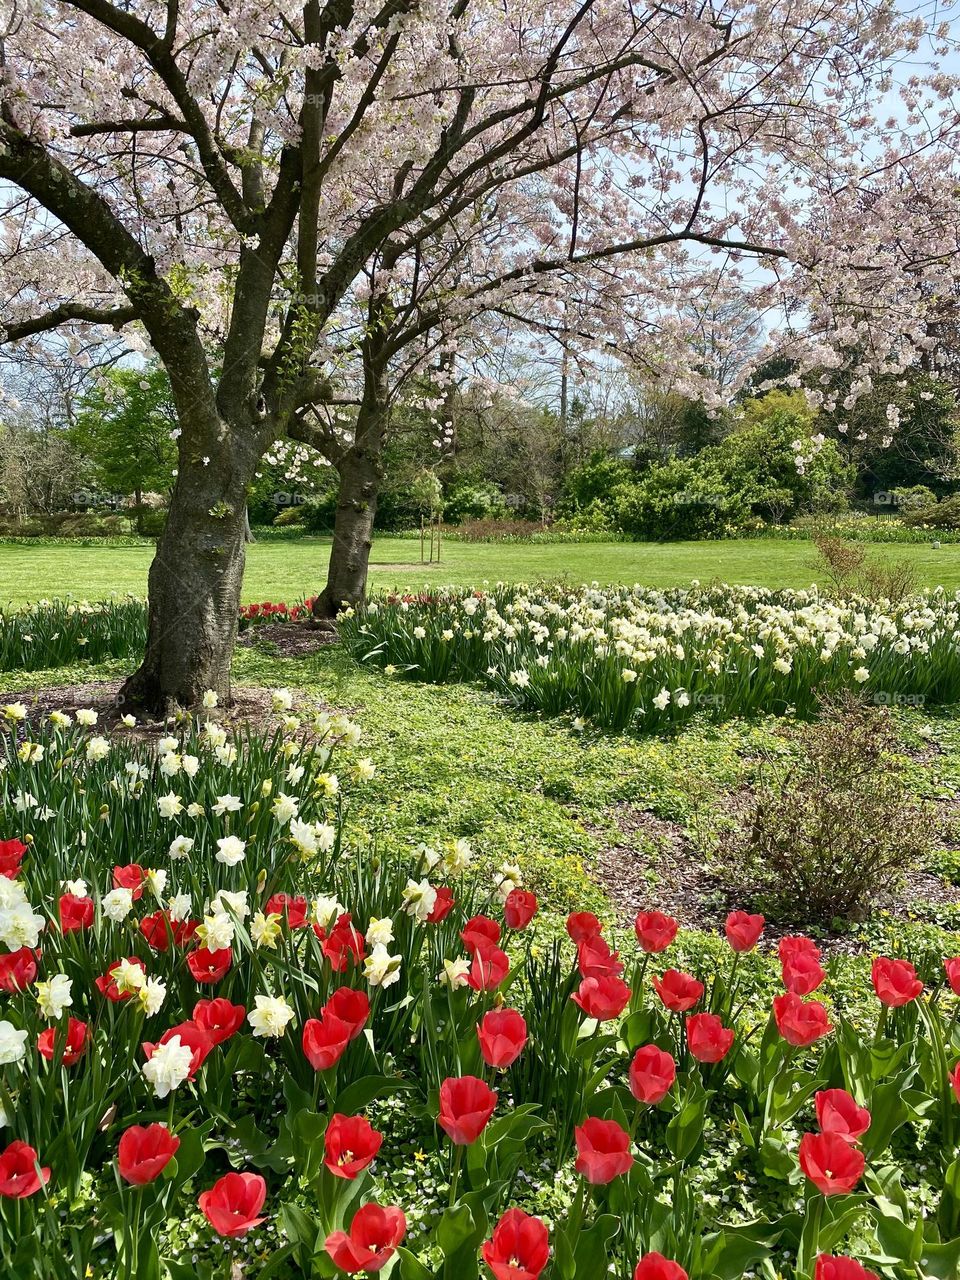 A garden with red and white tulips